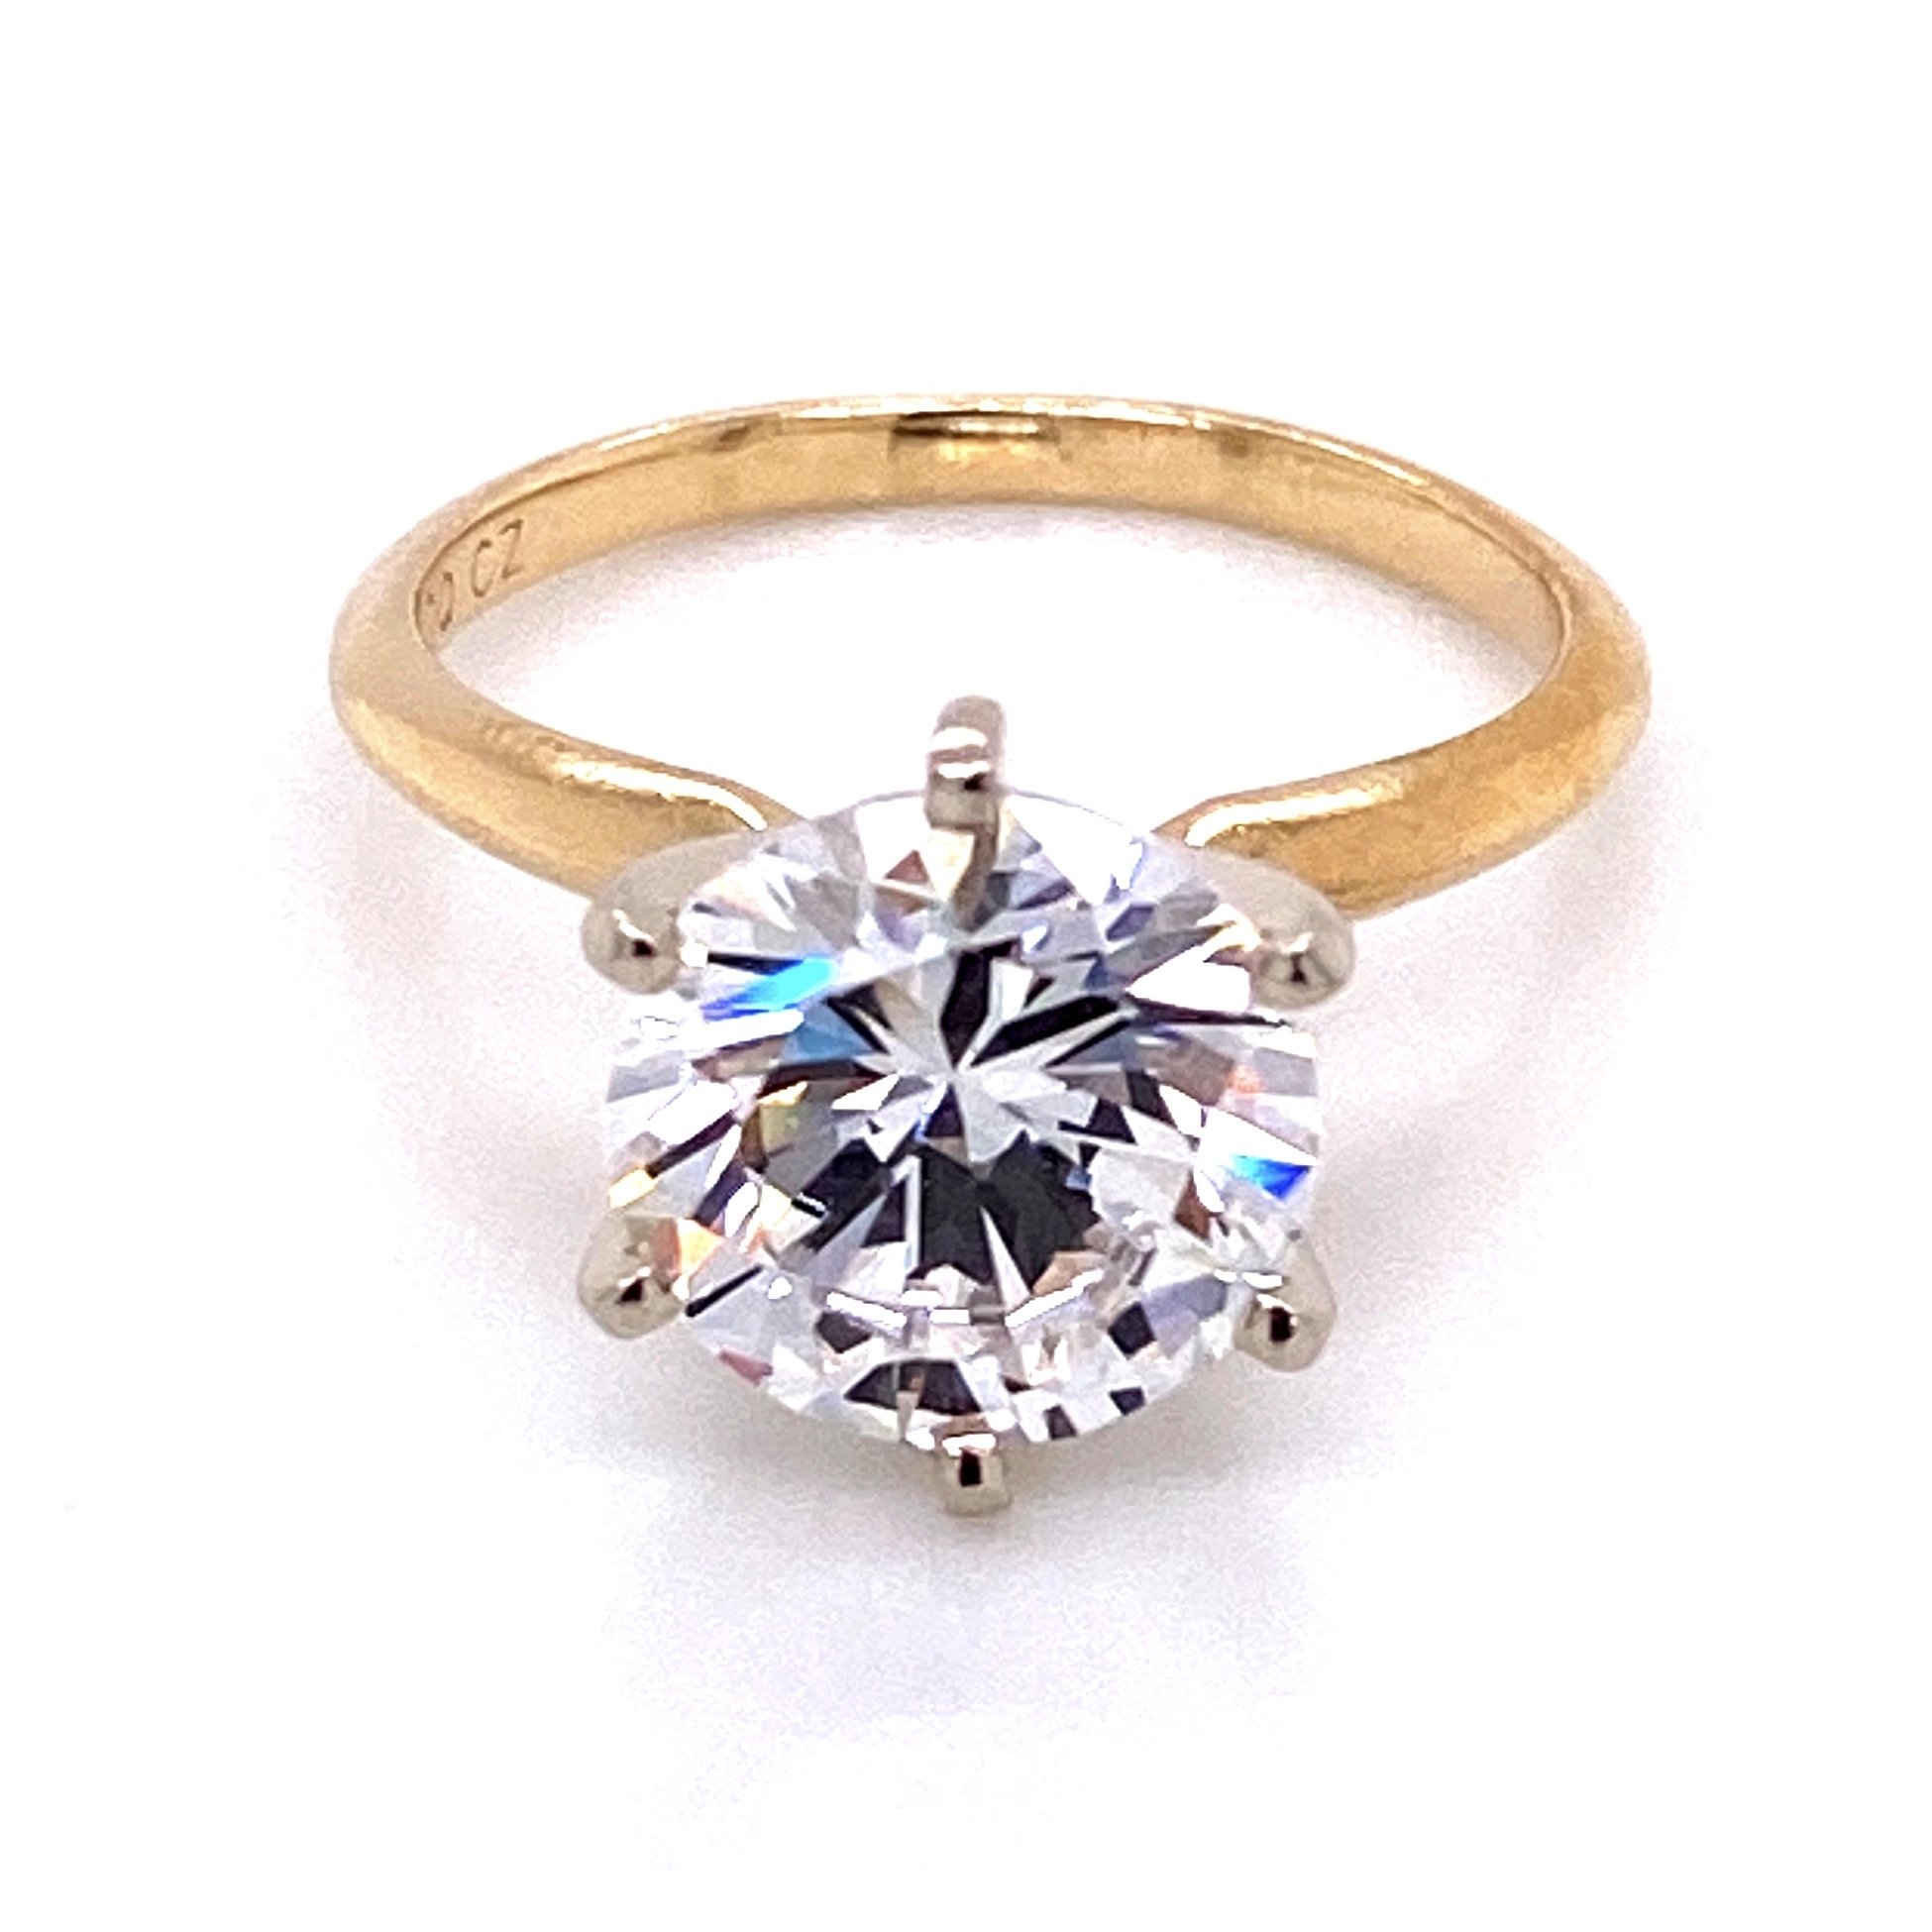 14K YG 6 Prong Solitaire CZ Cubic Zirconia Ring 2.6g, s